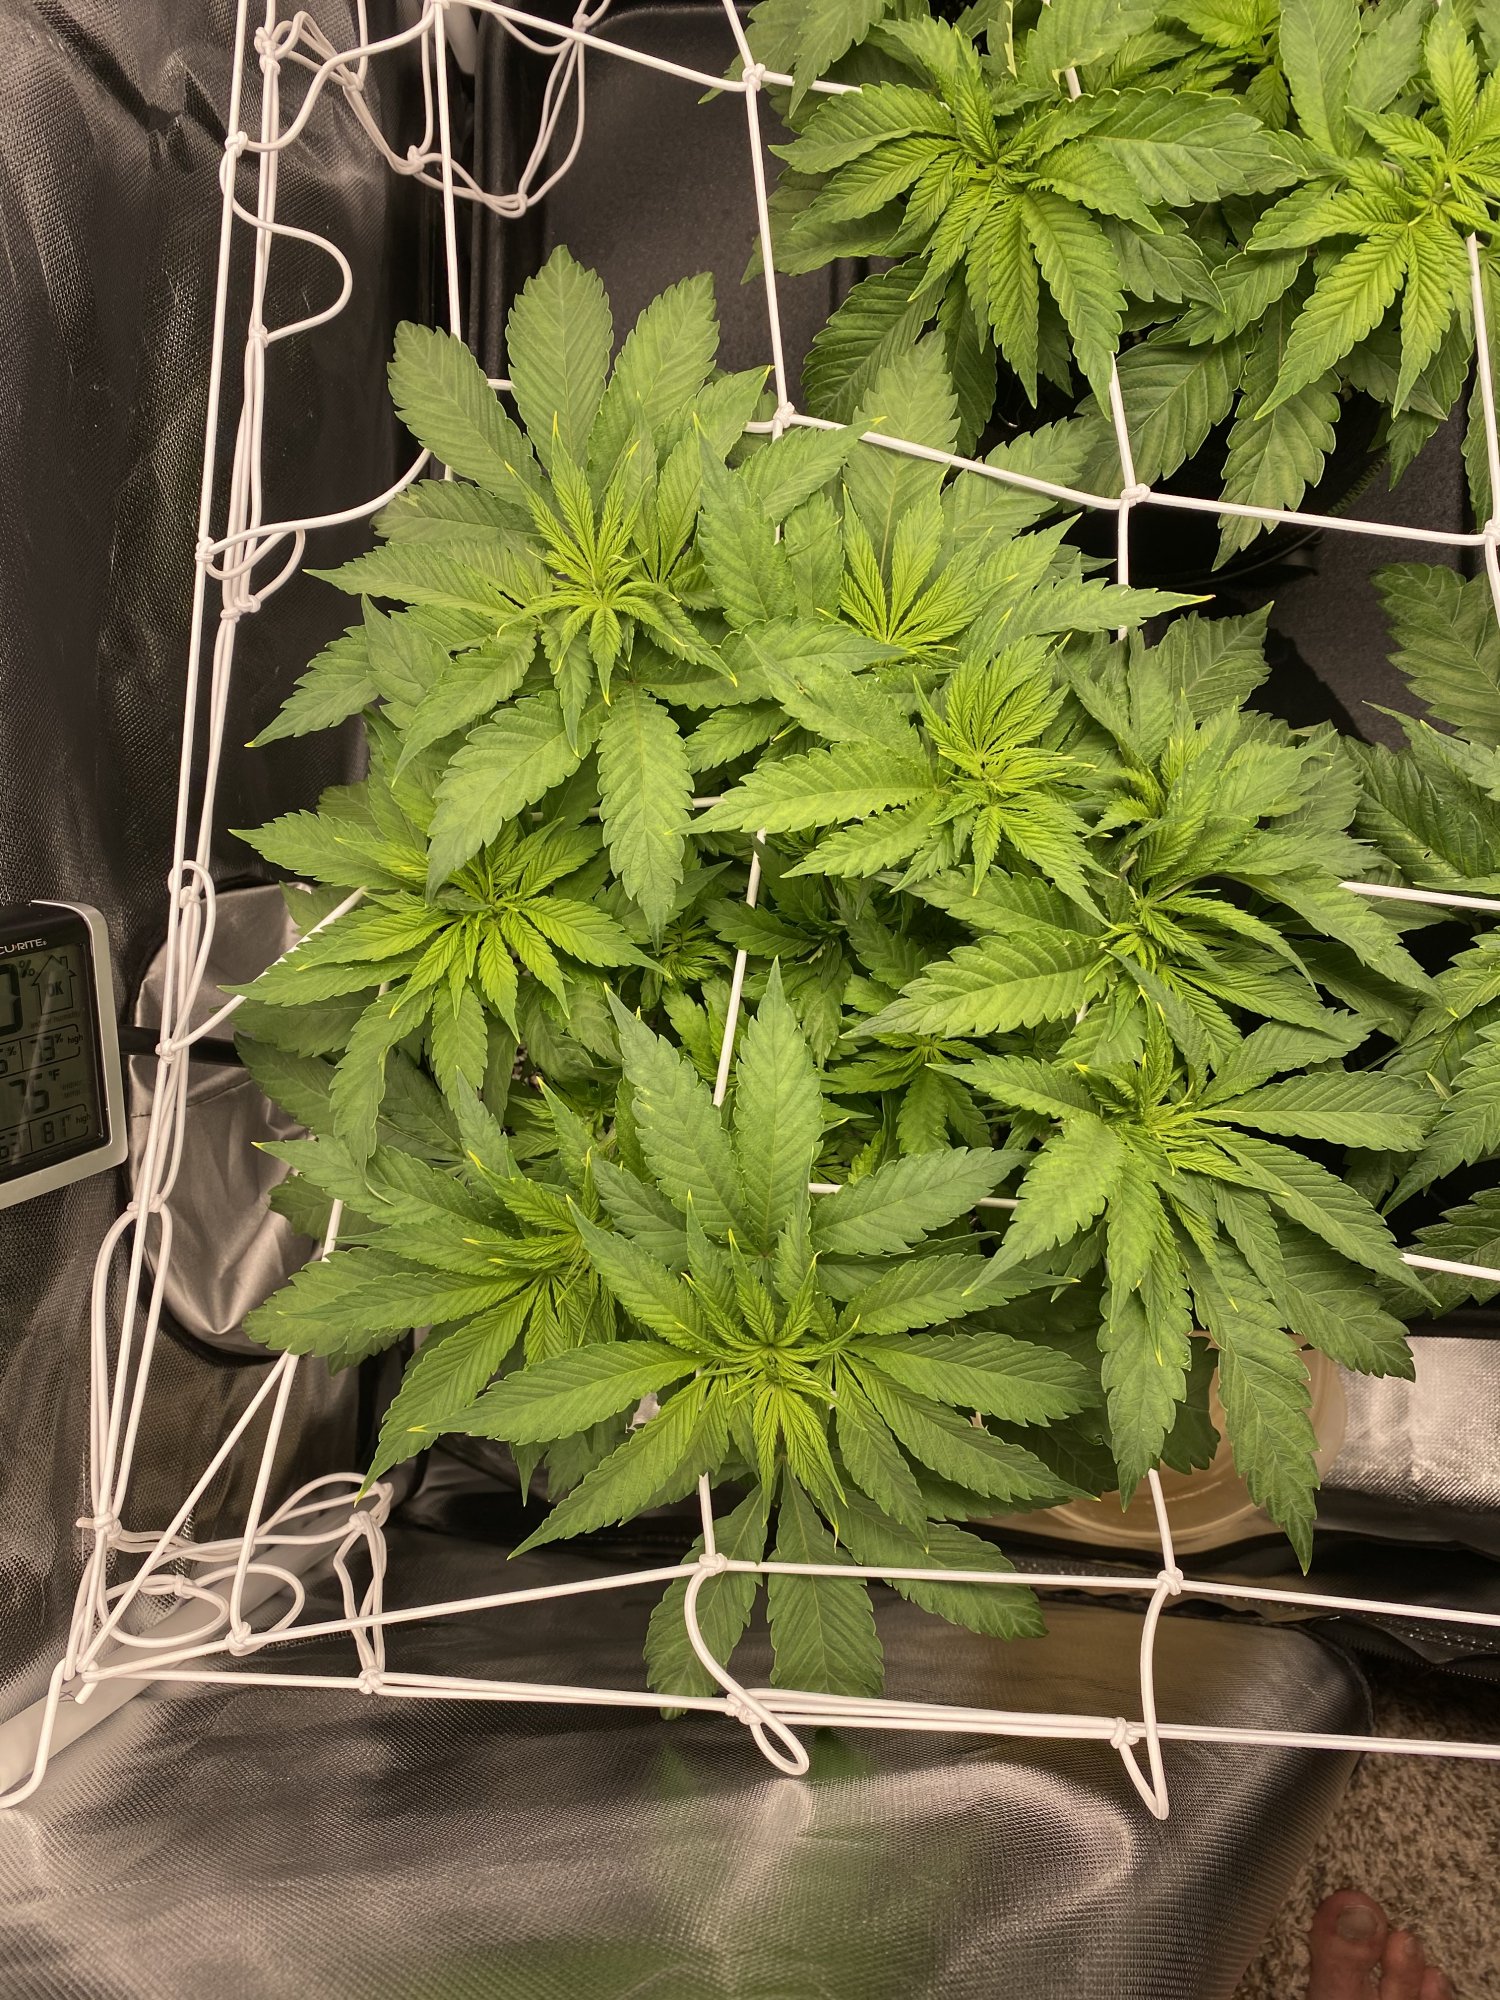 First grow issues 2